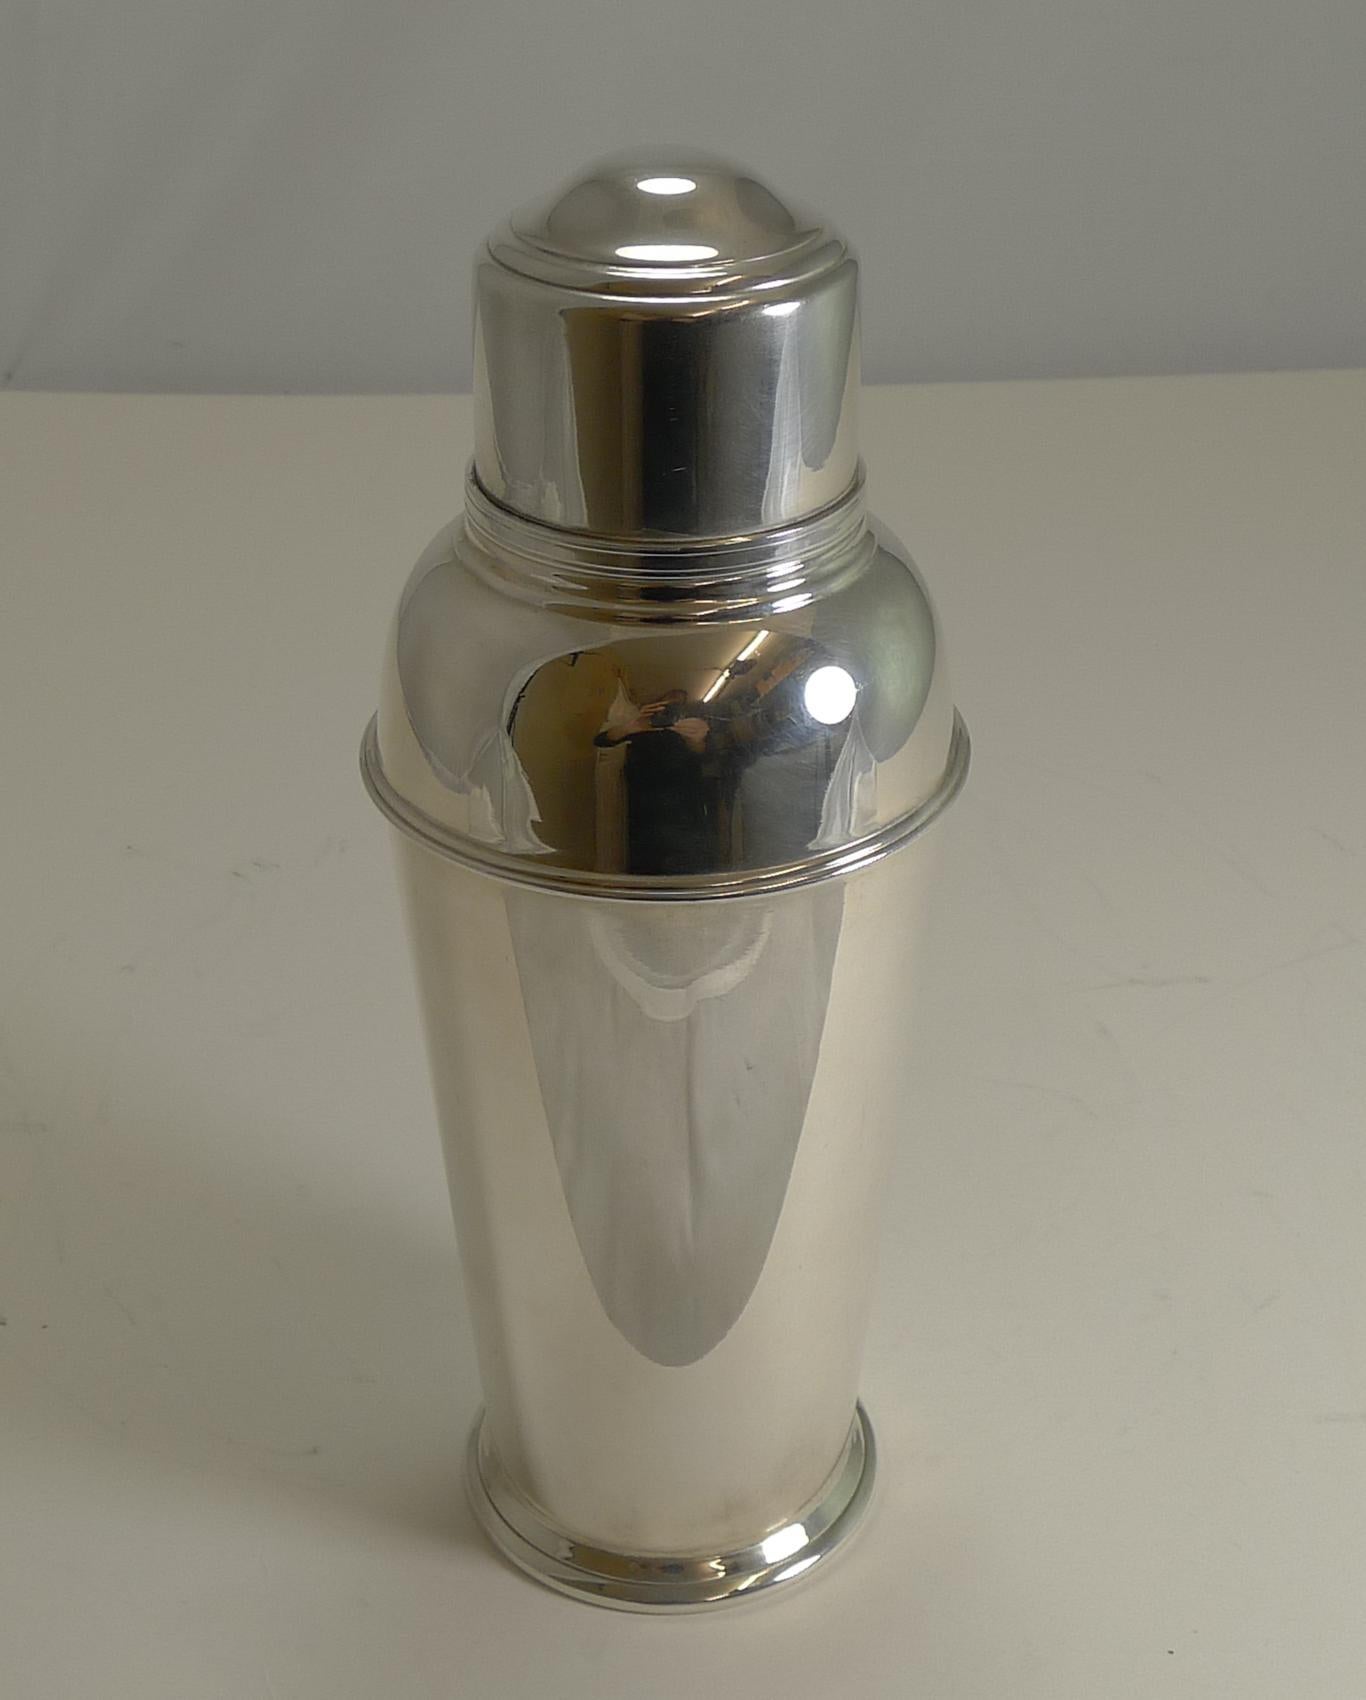 English Art Deco Cocktail Shaker Signed Brufords, Exeter, circa 1930